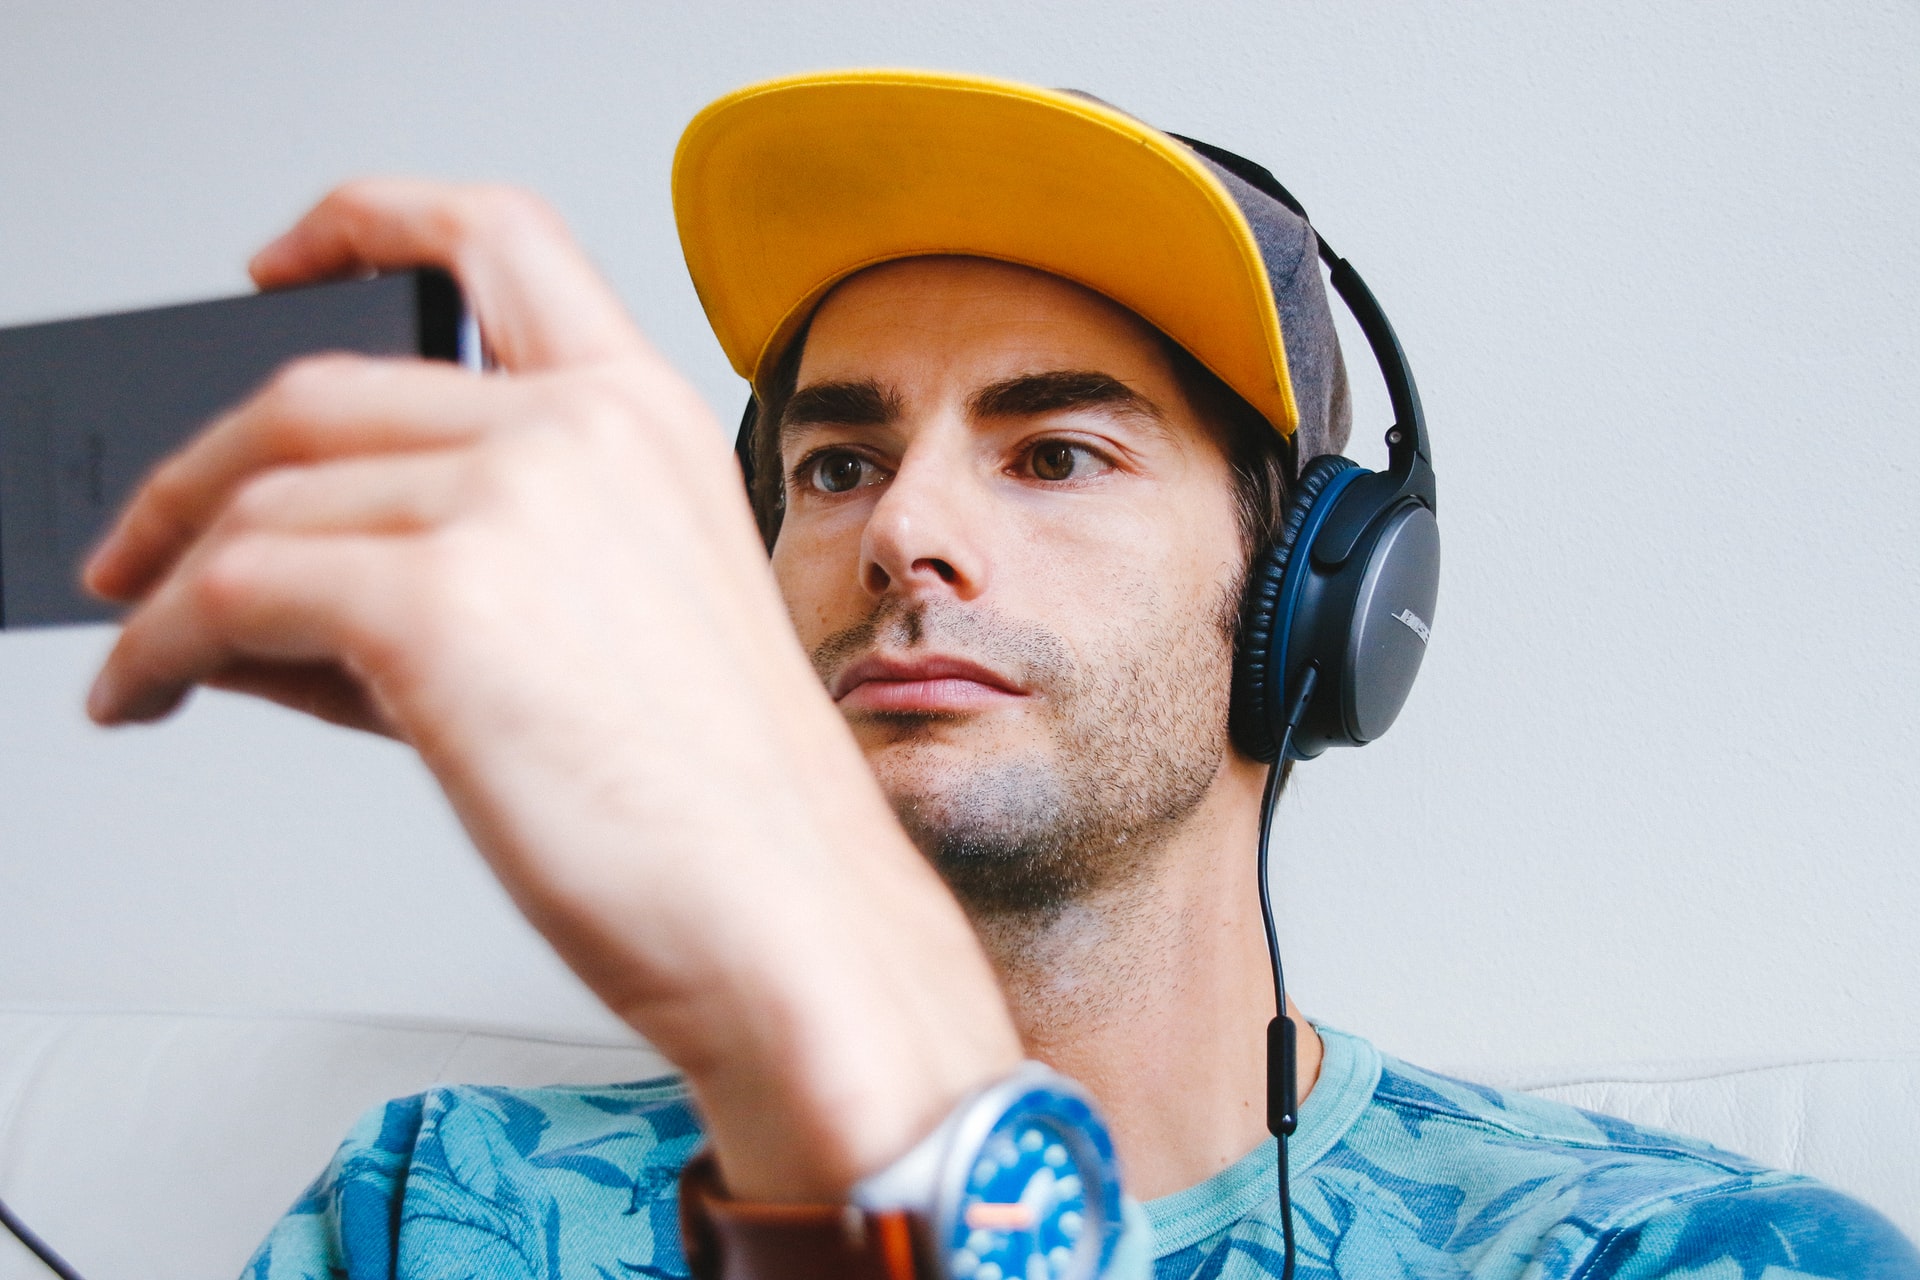 man wearing headphones and holding a phone